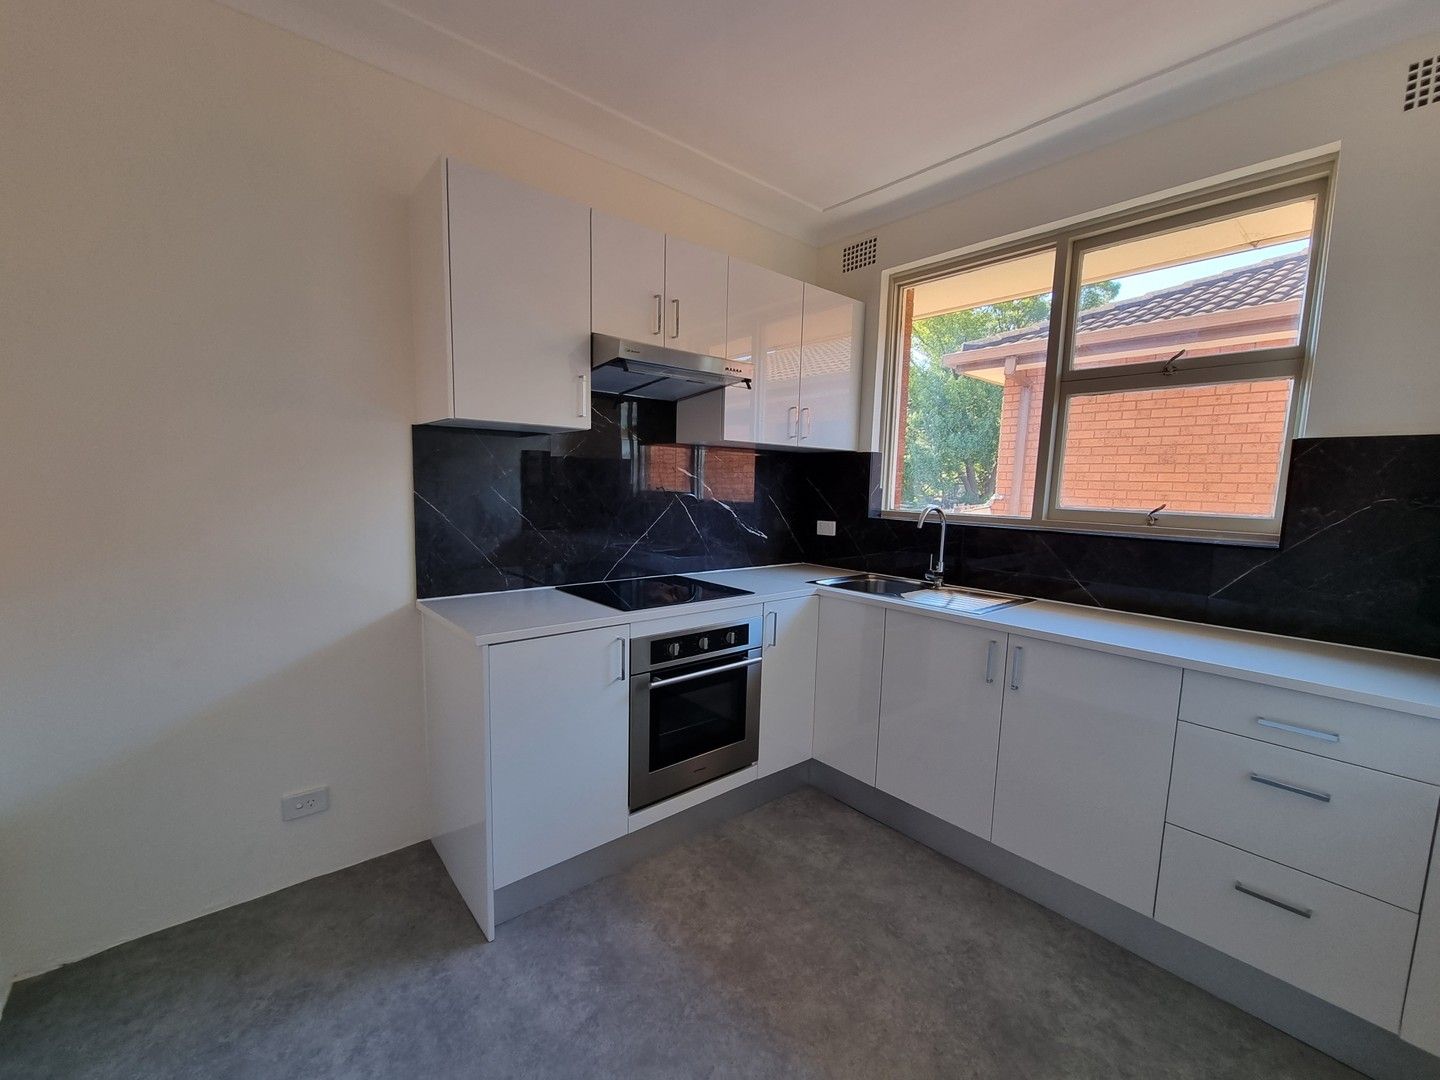 2 bedrooms Apartment / Unit / Flat in 5/9a Etonville Parade CROYDON NSW, 2132